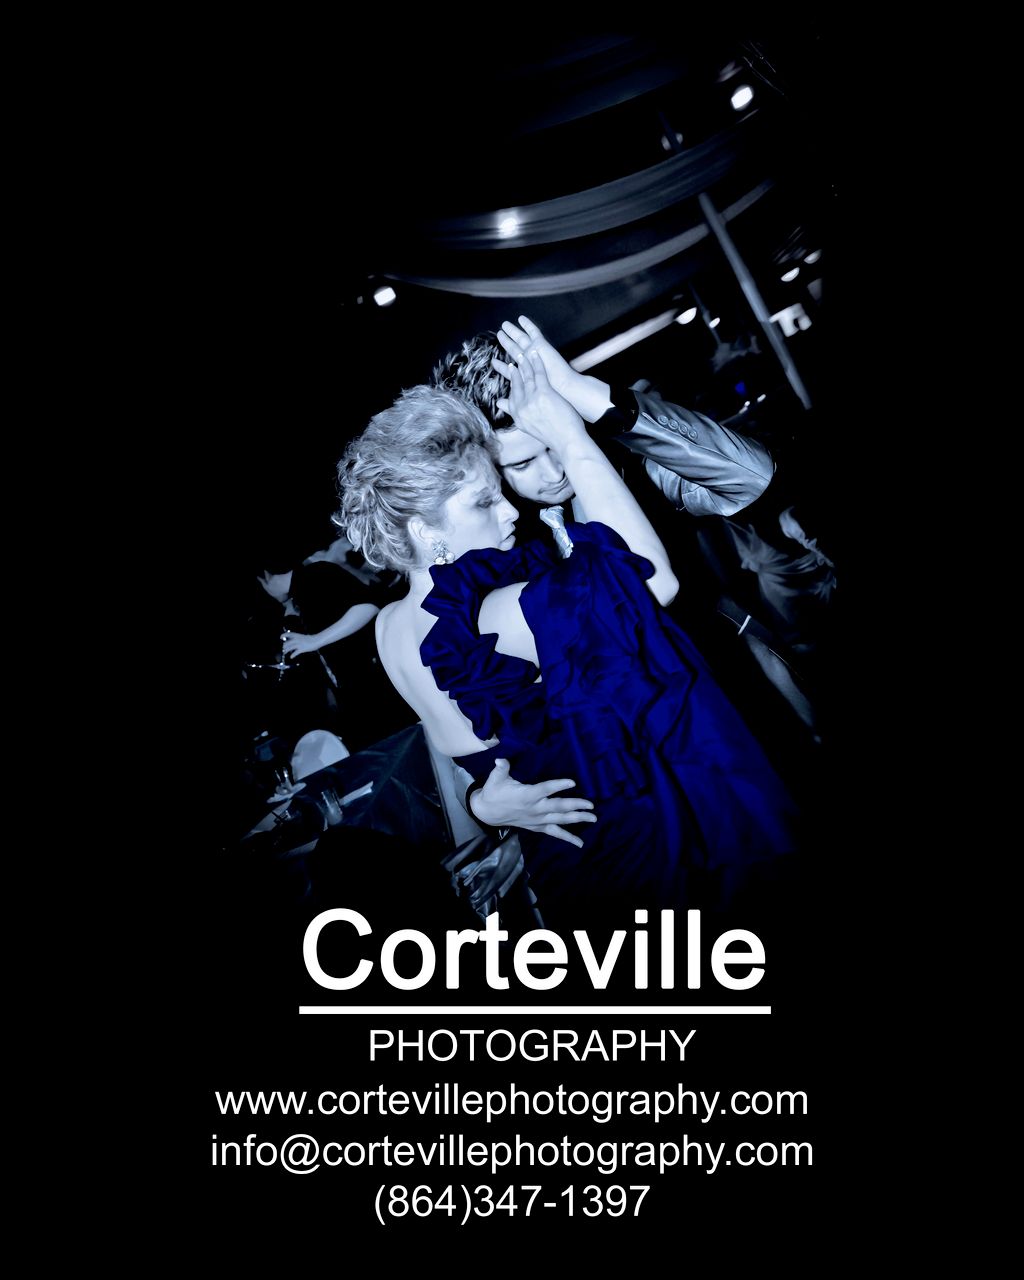 Corteville Photography